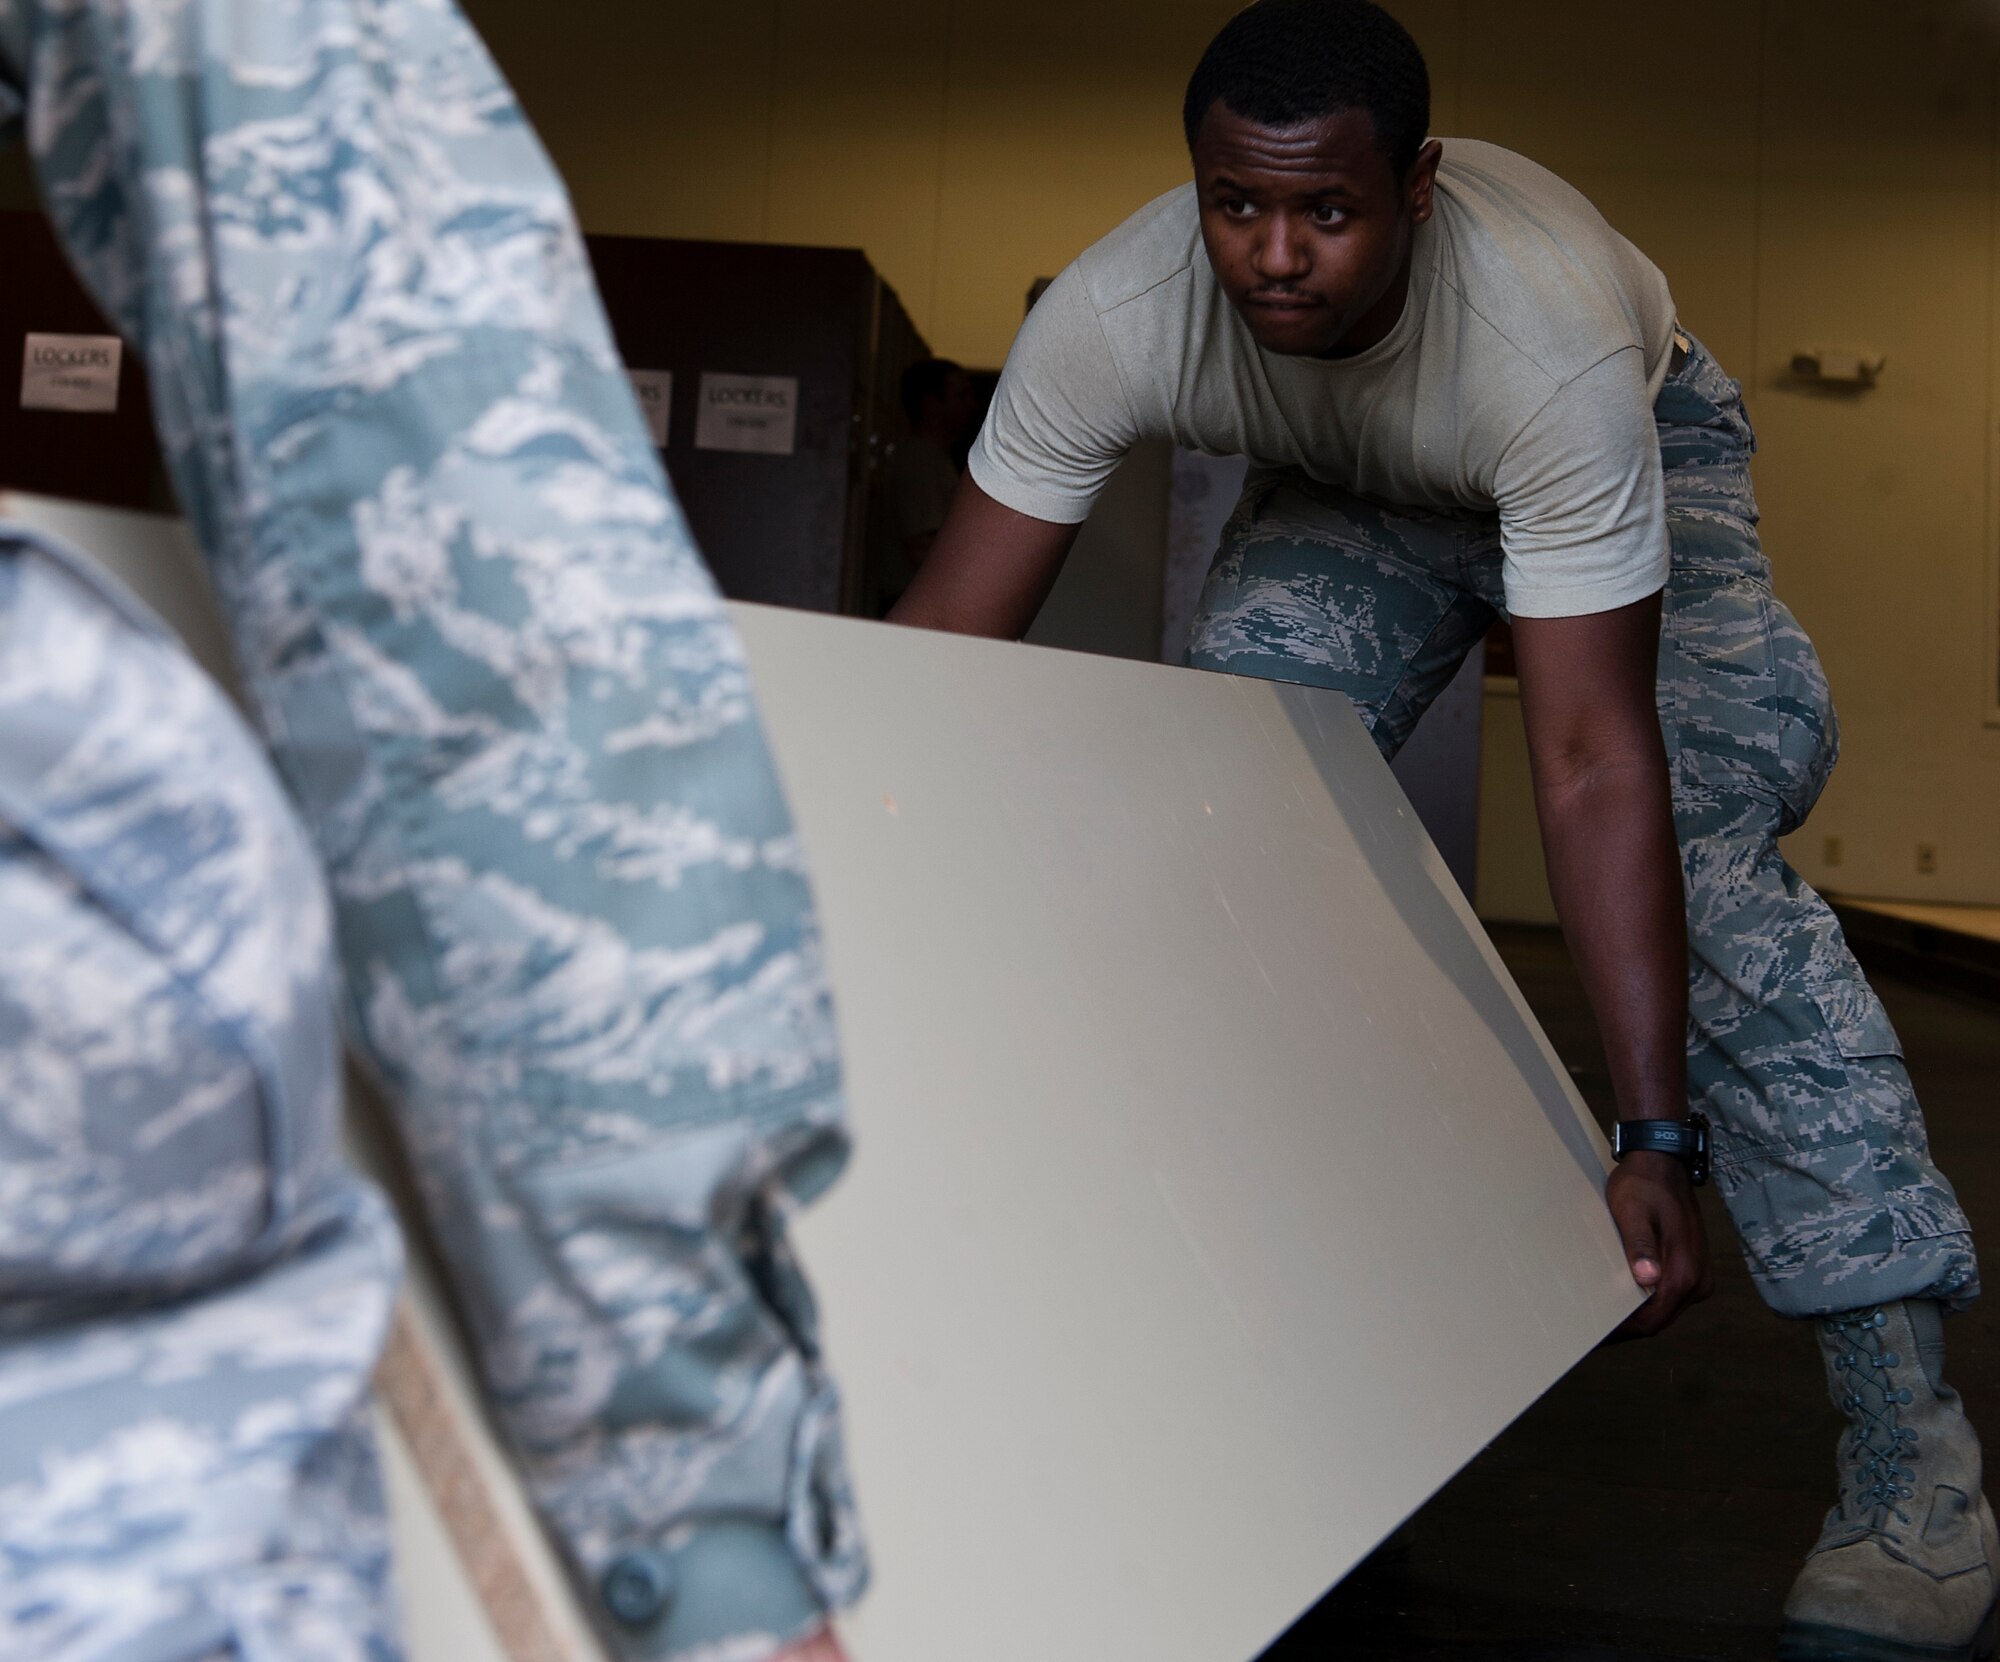 Airman 1st Class Michael C. Thomas, 7th Operations Support Squadron, helps move a locker into its new location as part of a consolidation project, Jan. 29, 2013, at Dyess Air Force Base, Texas. The project brought the oxygen and flightline sections of aircrew flight equipment into one facility. Contractors projected that the consolidation would cost the Air Force between $15,000 and $20,000, but 7th OSS Airmen completed the job for much less. Thanks to the large number of Airmen who volunteered to help, the project was completed in under a week. (U.S. Air Force photo by Airman 1st Class Damon Kasberg/ Released)